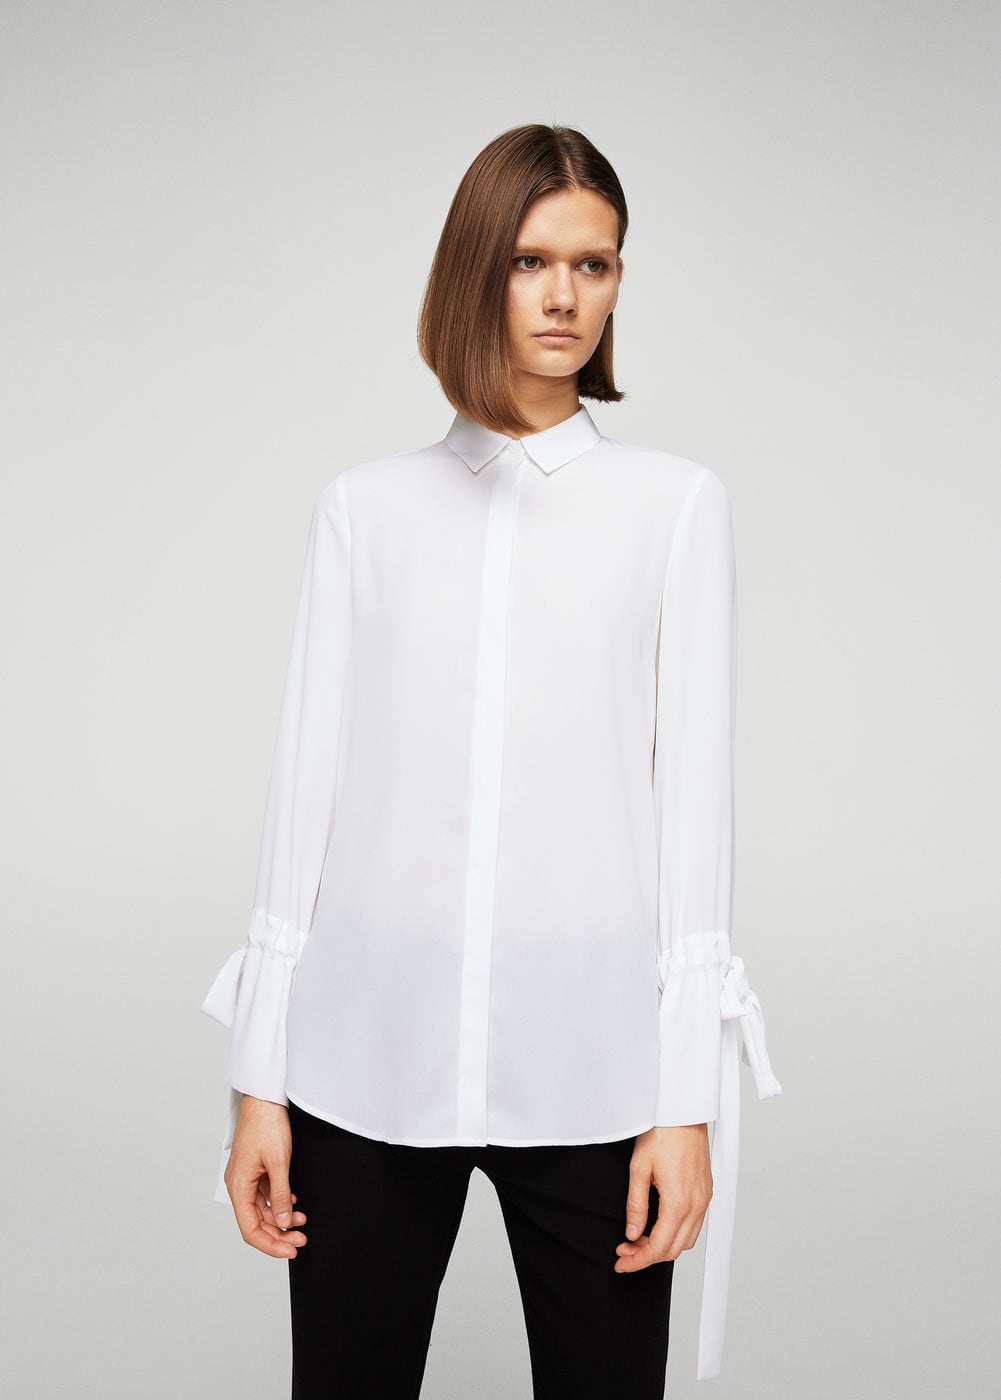 8 Cool New Takes On The Classic White Shirt - 29Secrets